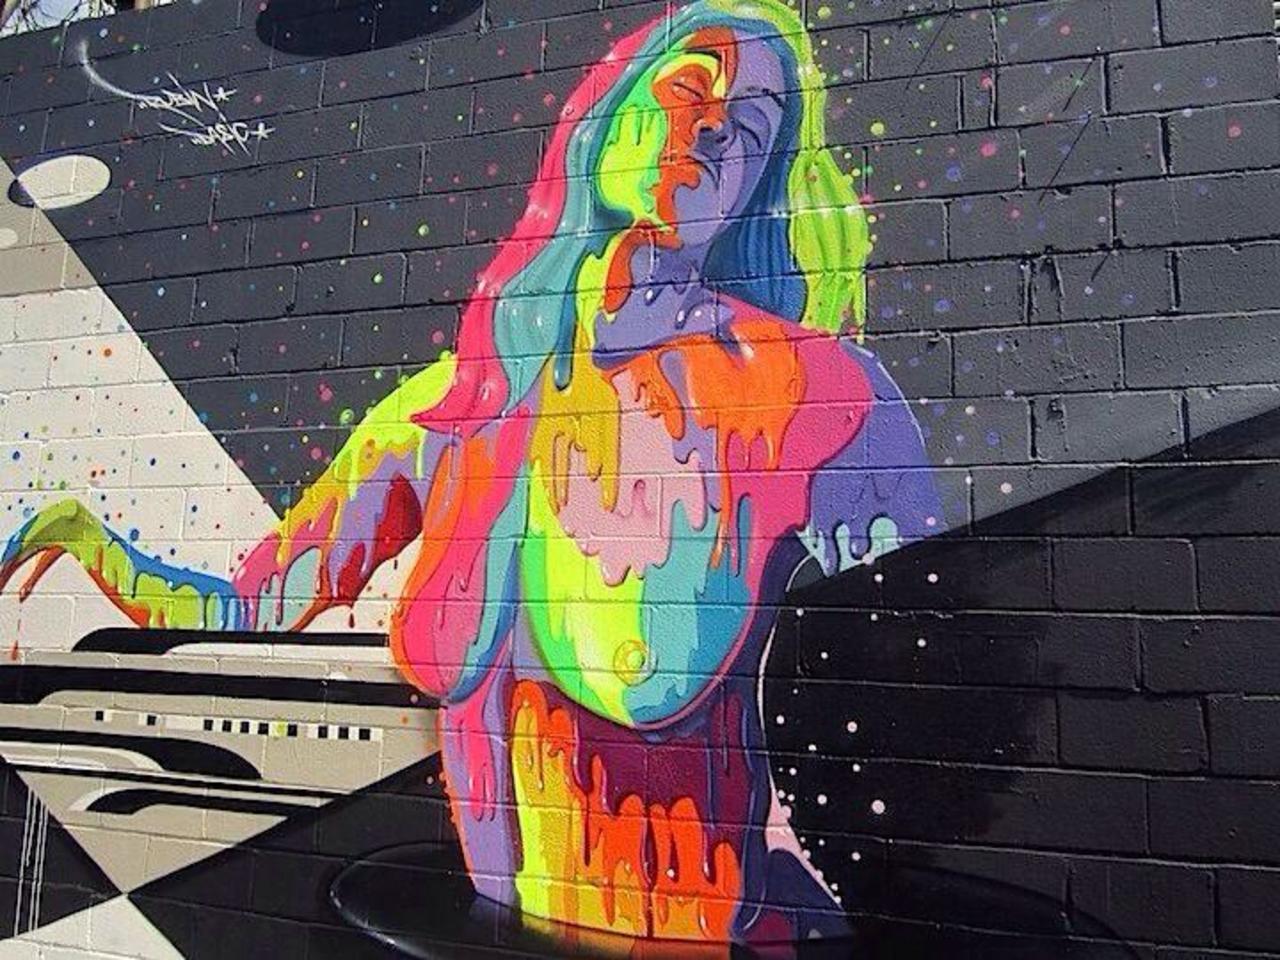 4 different unique & surreal yet brilliant Street Art pieces from Dasic in NYC #art #graffiti #mural #streetart http://t.co/P7Oa9FMhDq